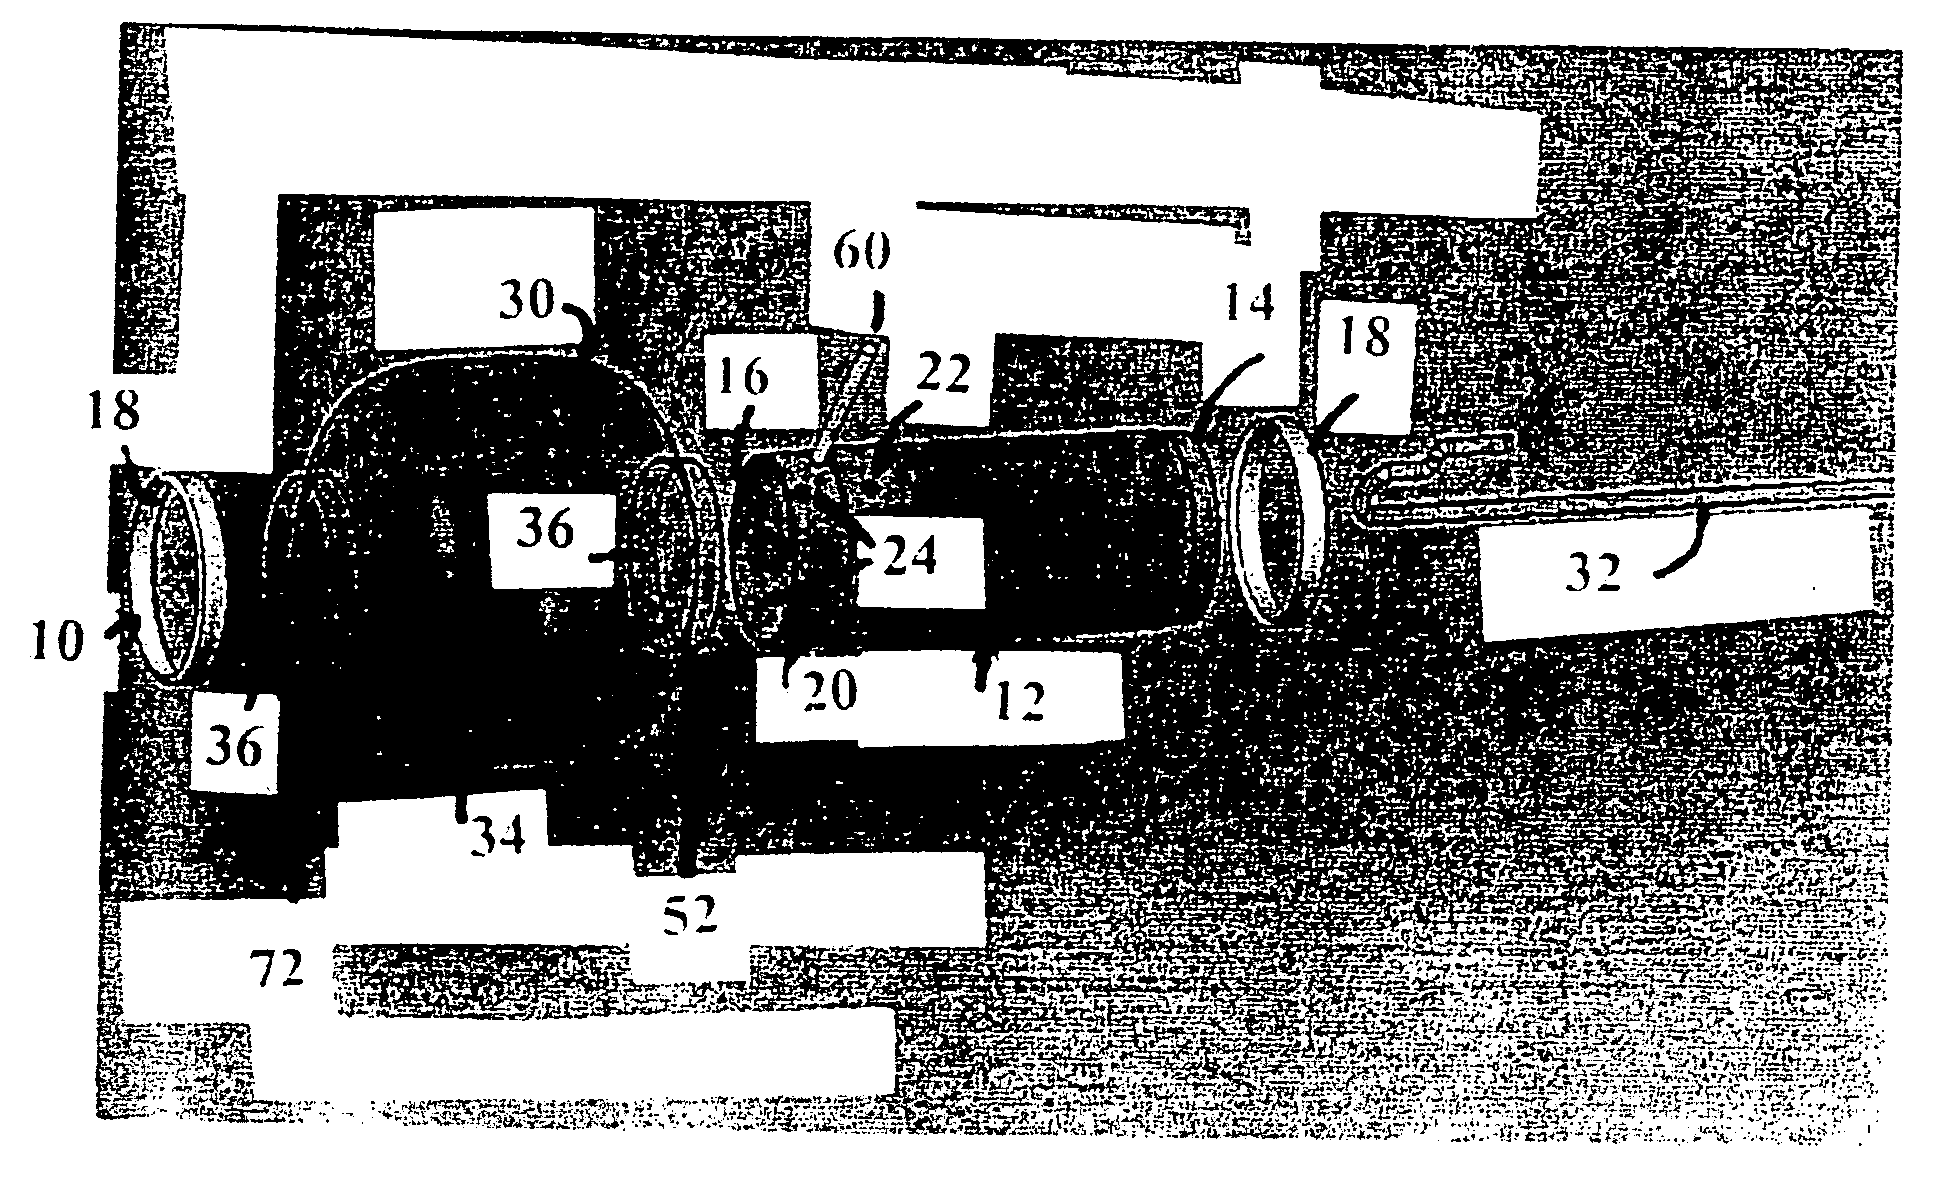 Systems and methods for hemorrhage control and or tissue repair